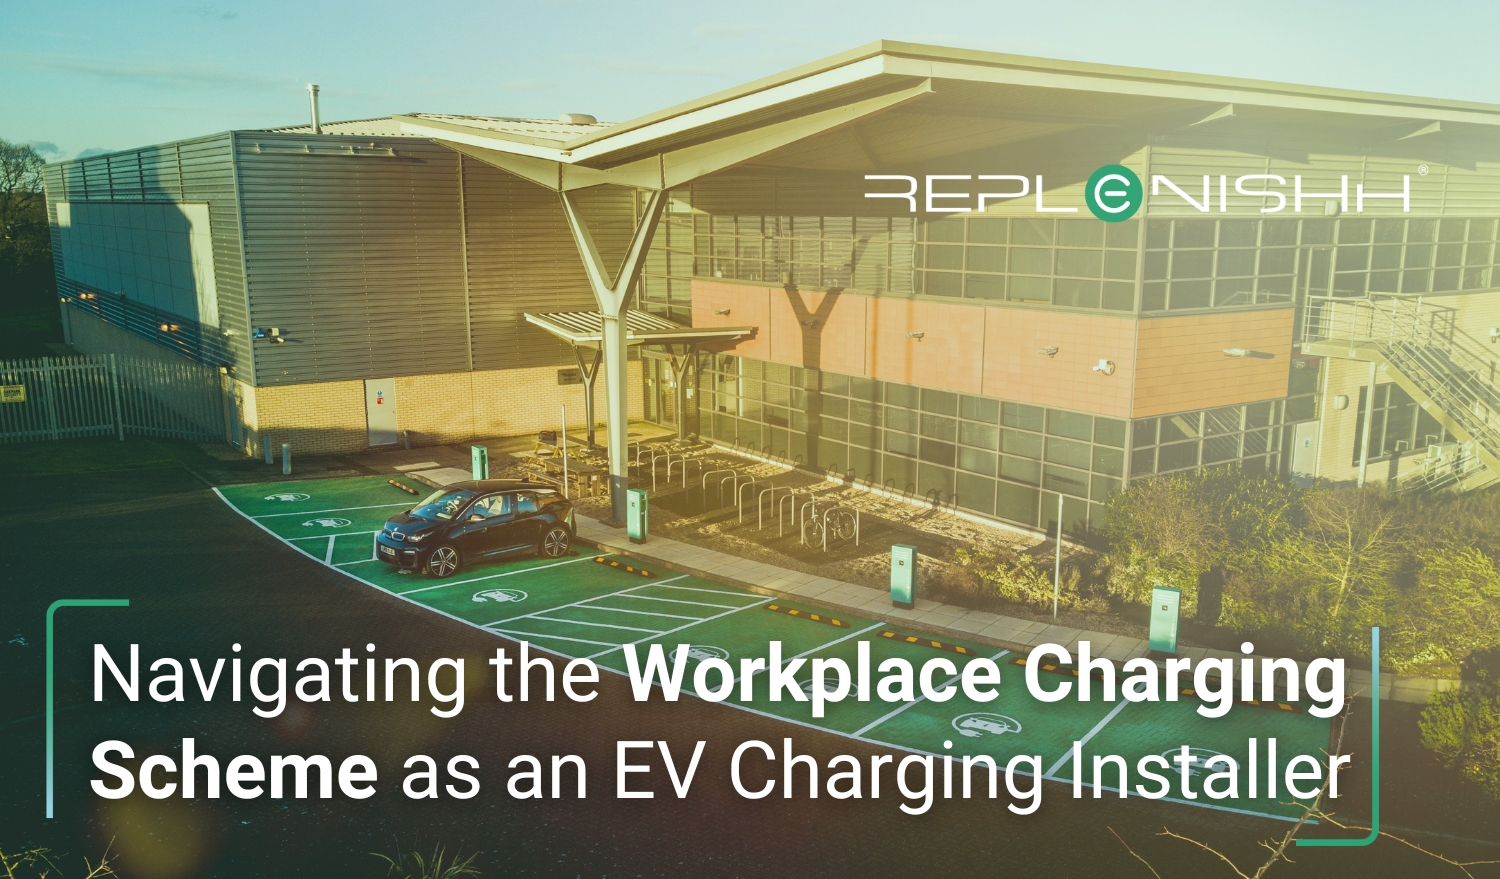 Navigating the Workplace Charging Scheme as an EV Charging Installer